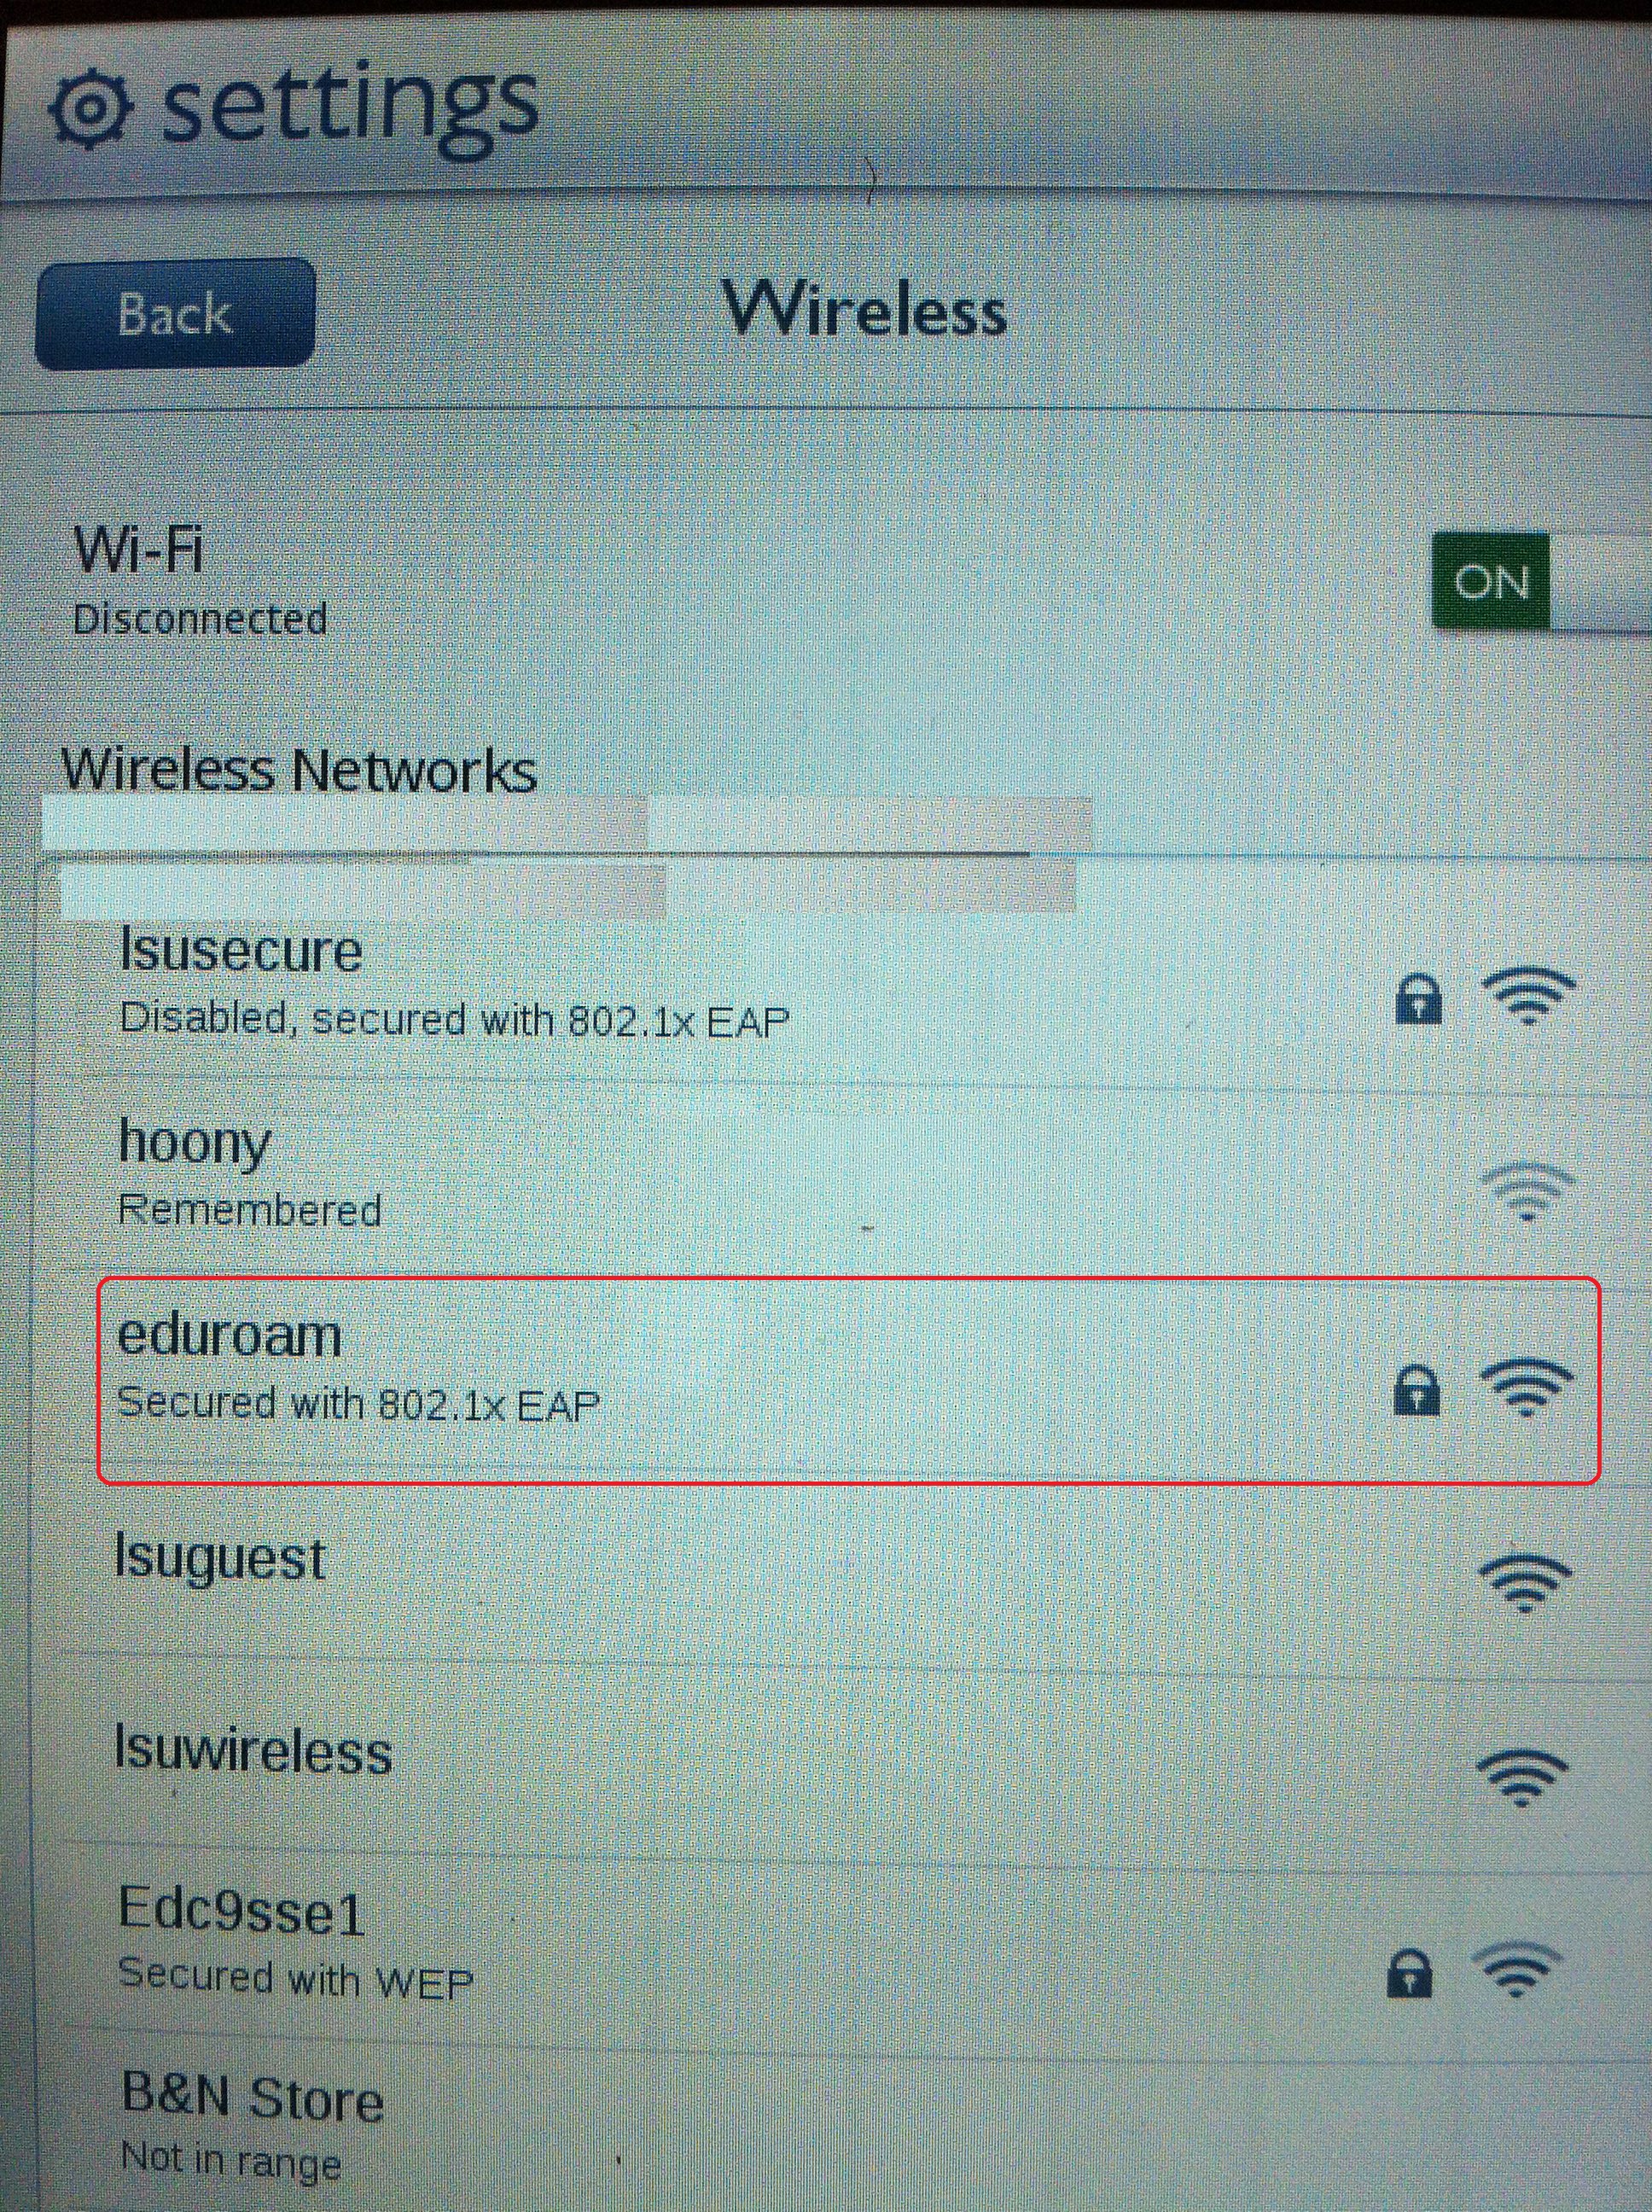 Nook Tablet Wireless Settings with eduroam selected